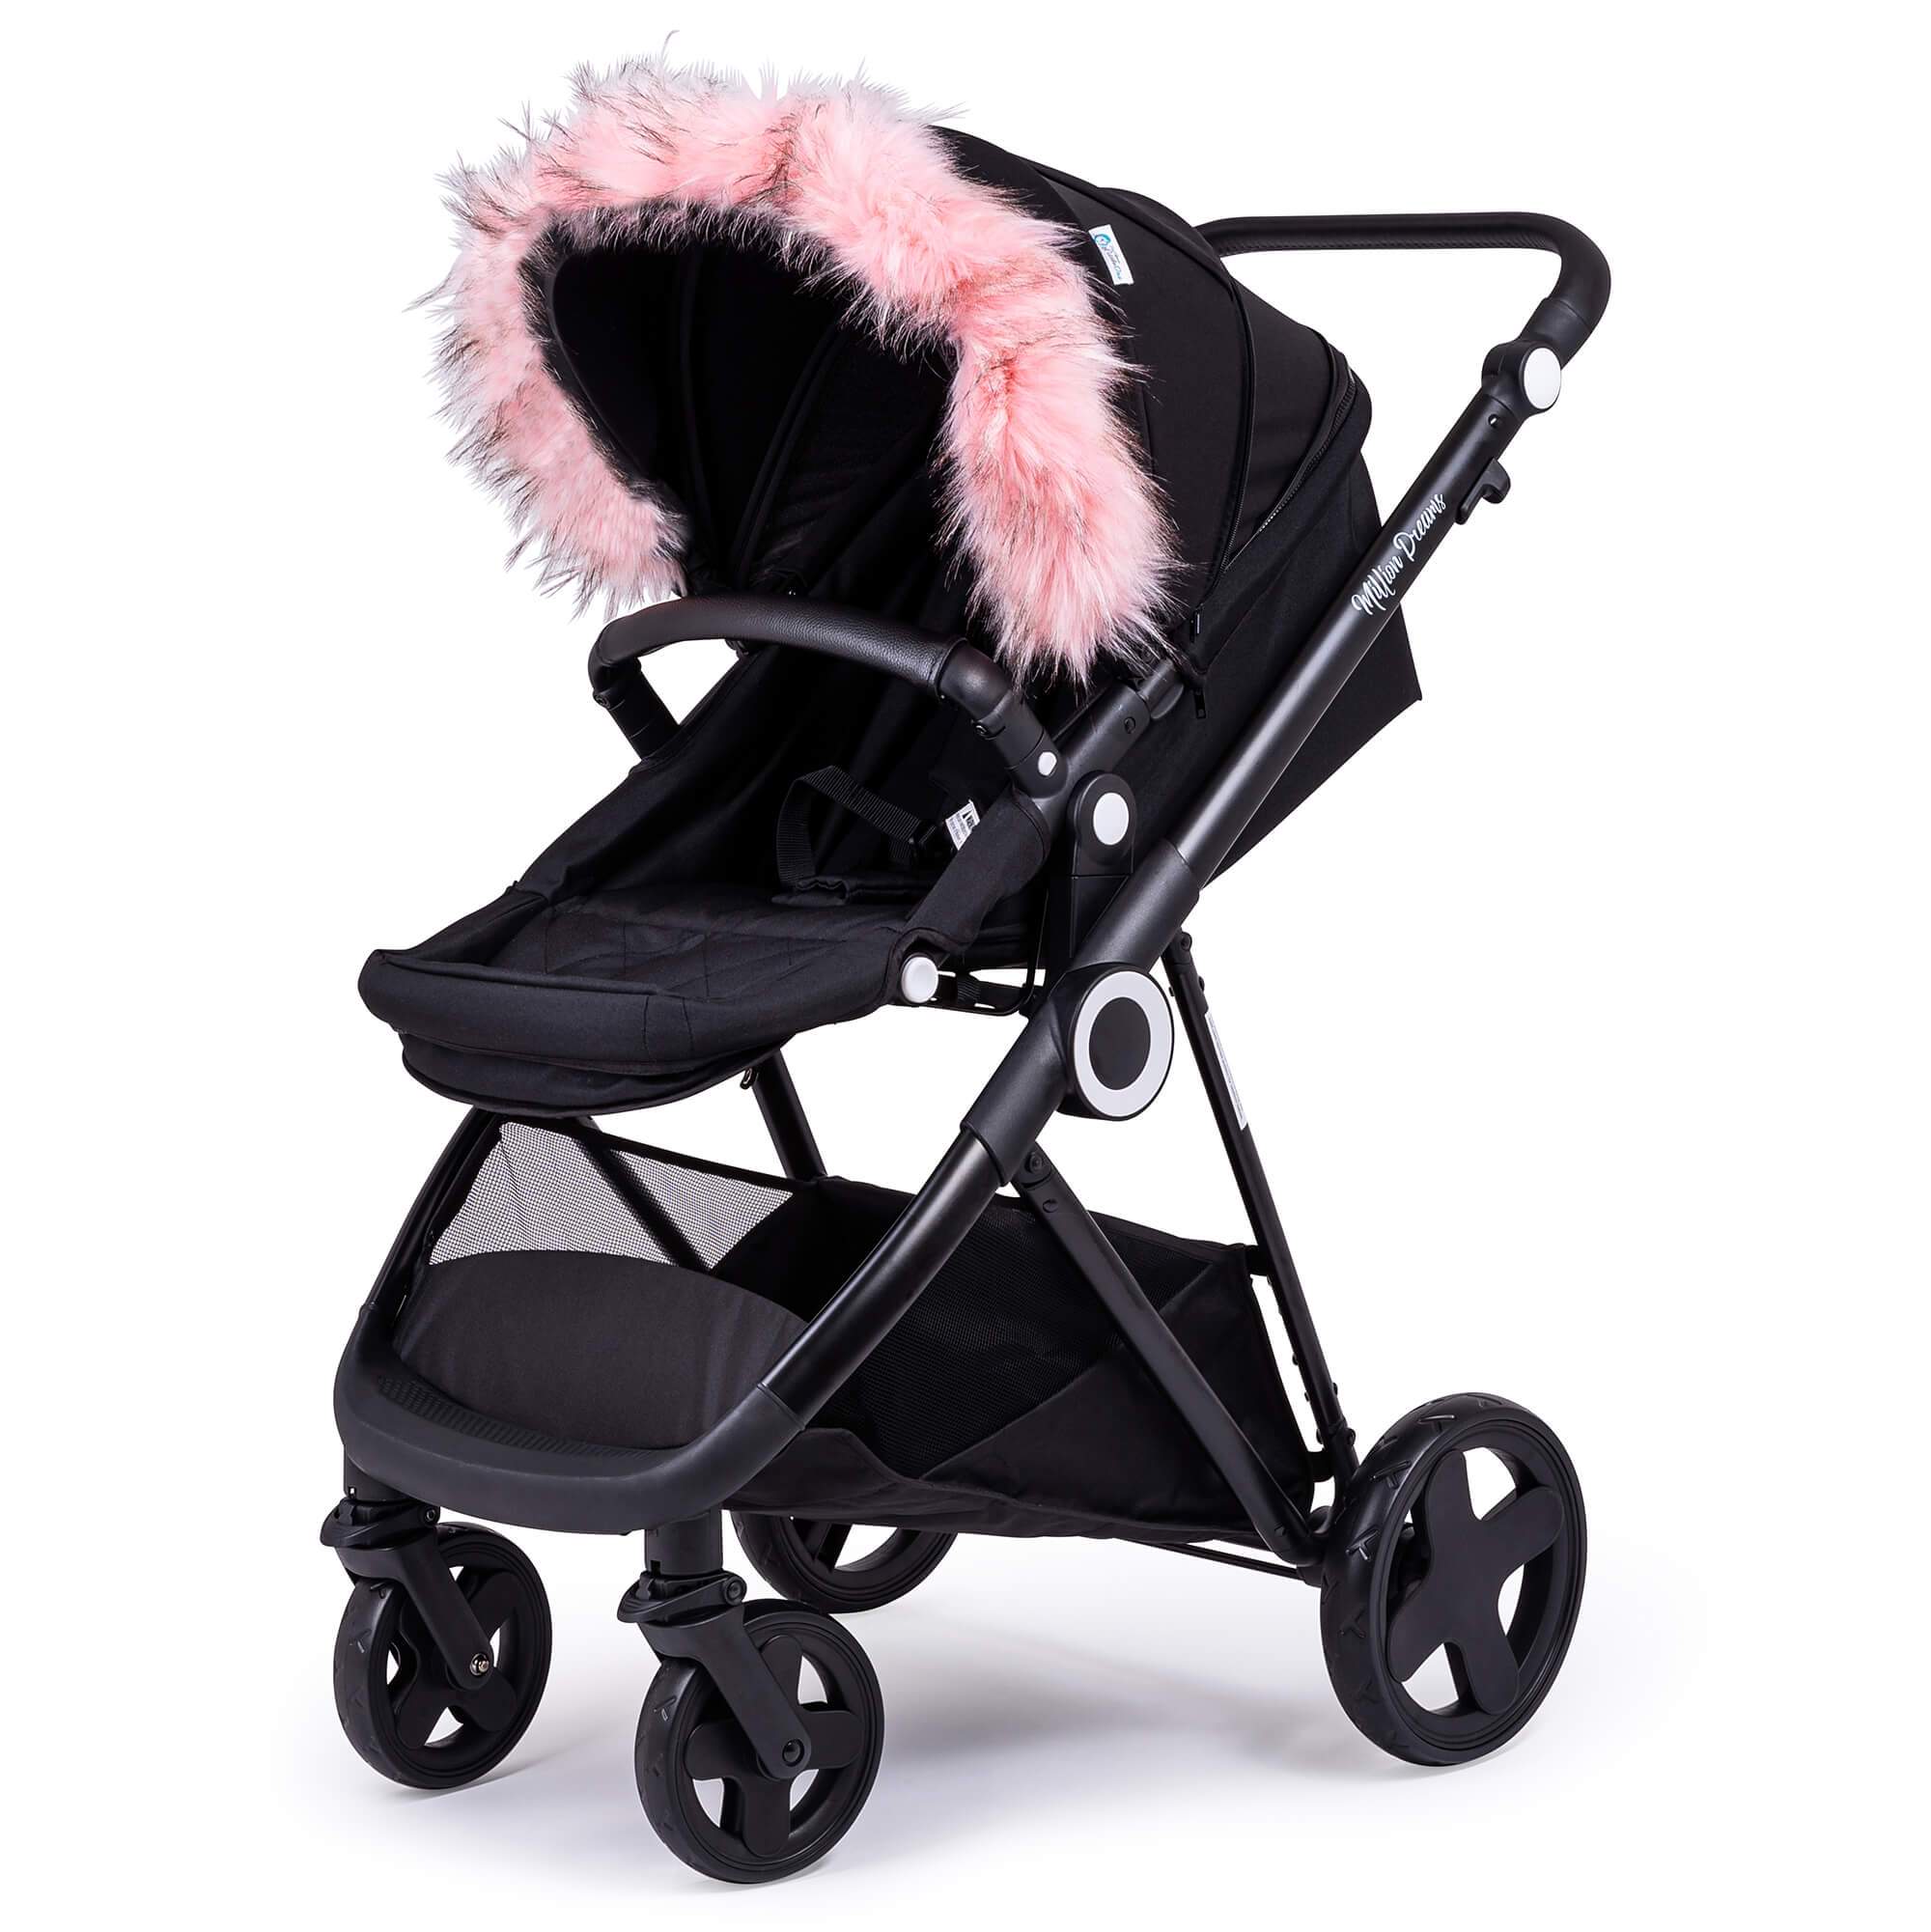 Pram Fur Hood Trim Attachment for Pushchair Compatible with Joolz - Light Pink / Fits All Models | For Your Little One